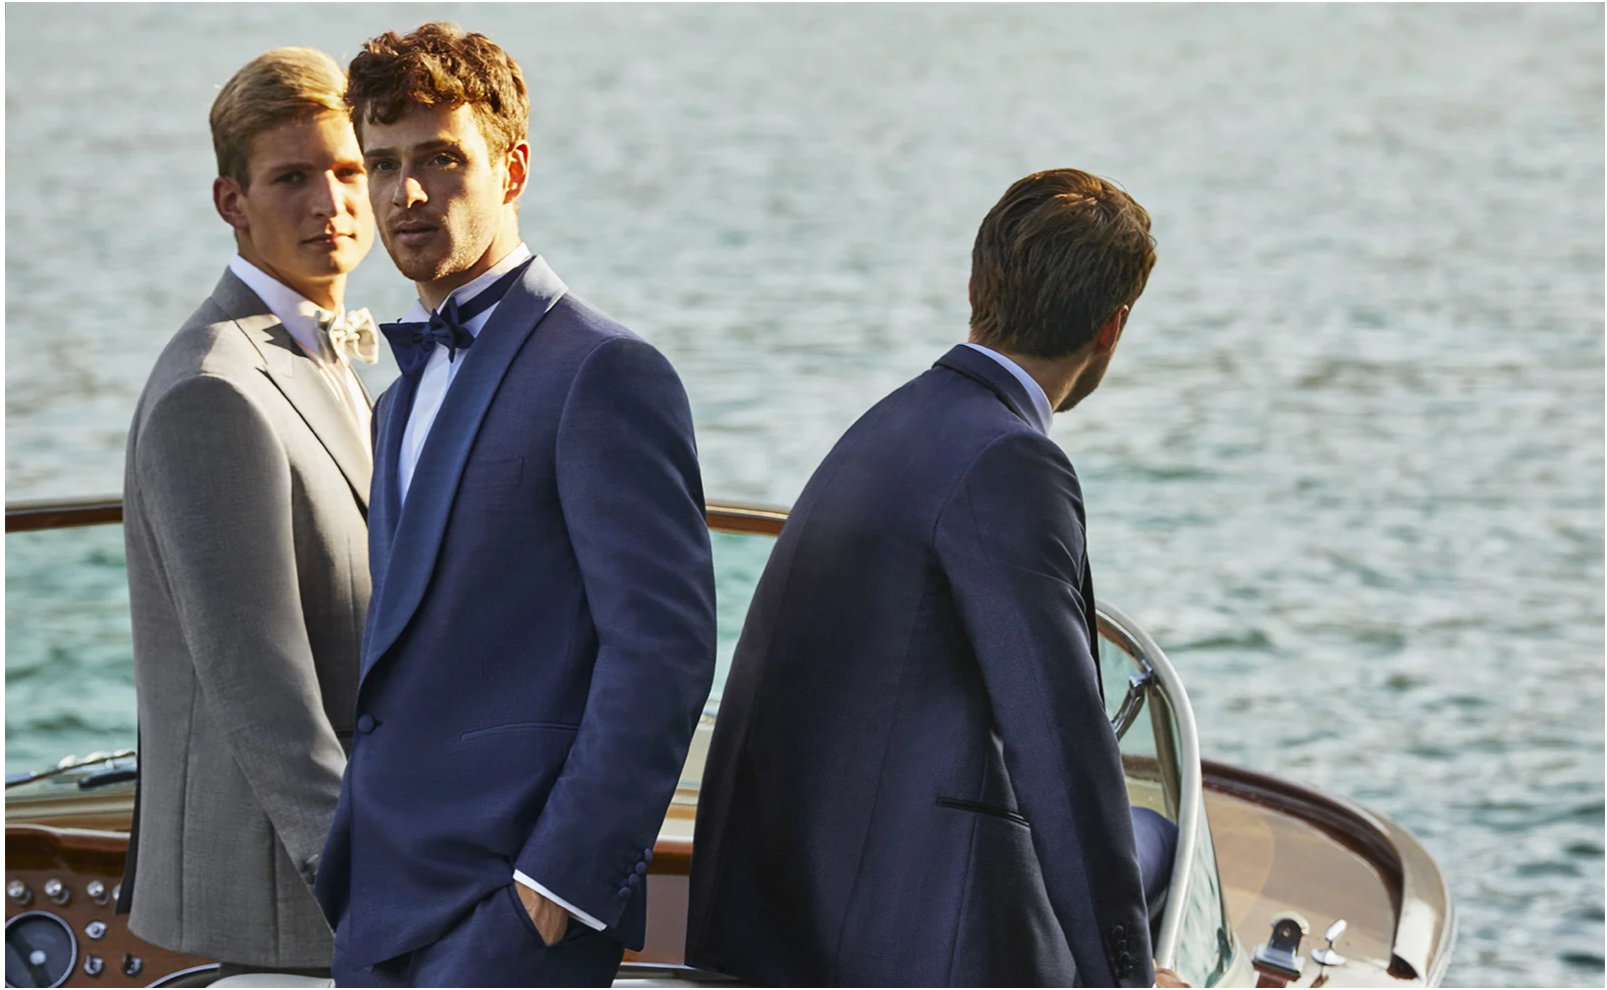 WEDDING SUITS FOR GROOMS AND GUESTS: HOW SHOULD MEN DRESS FOR A WEDDING?